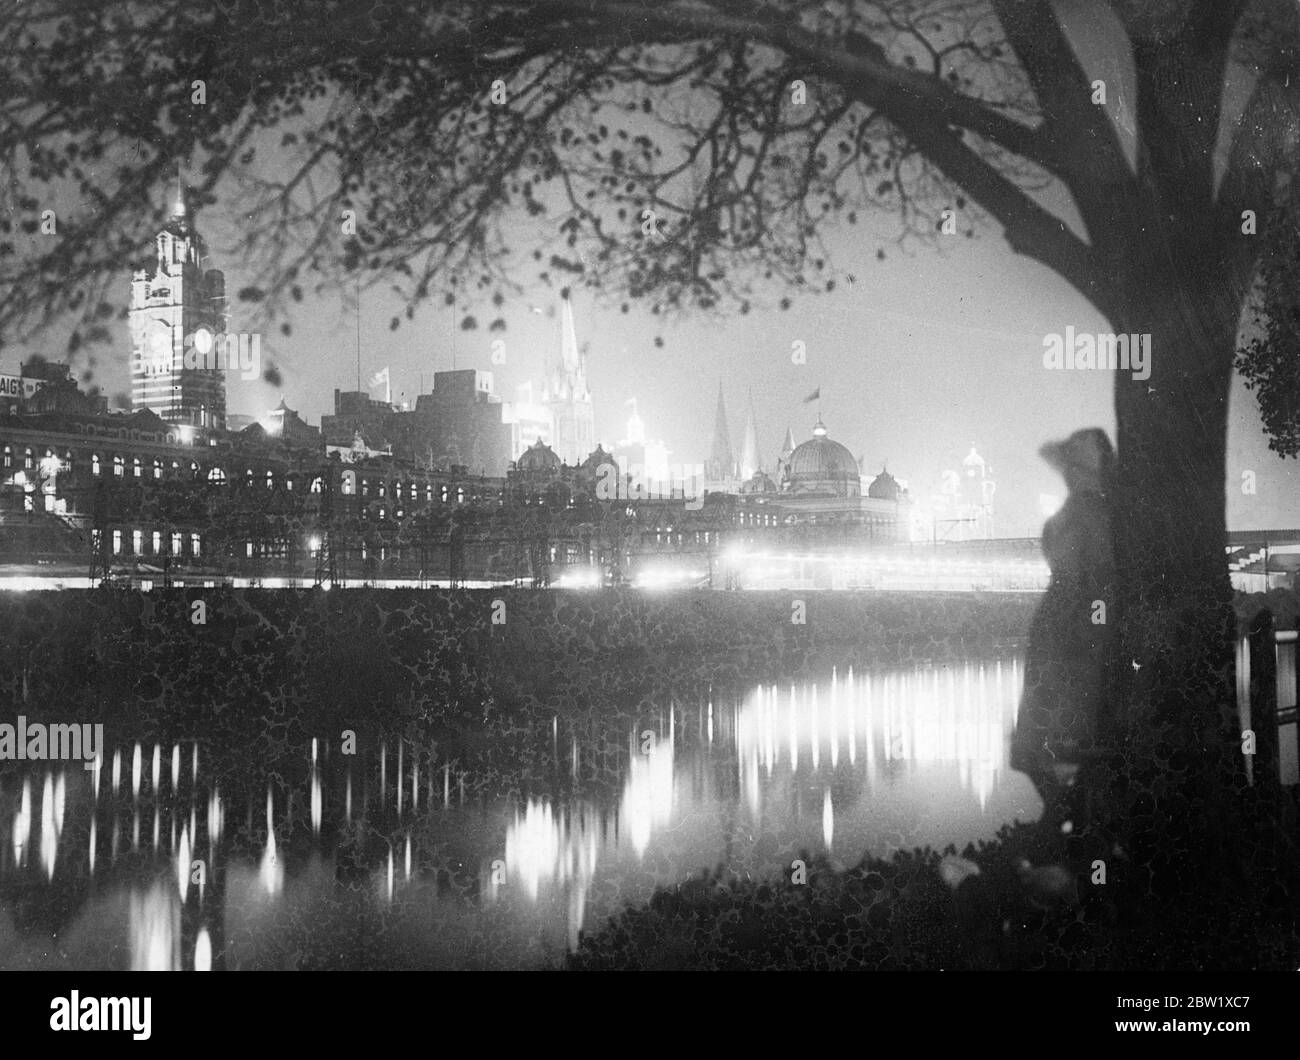 Melbourne a fairy city during Coronation celebrations. Melbourne, Australia, presented a beautiful night spectacle when the city was eliminated by an elaborate scheme of floodlighting in celebration of the Coronation. Photo shows, a view of flood lighted Melbourne seen across the River Yarra. Flinders Street railway station is in the foreground. 27 May 1937 Stock Photo